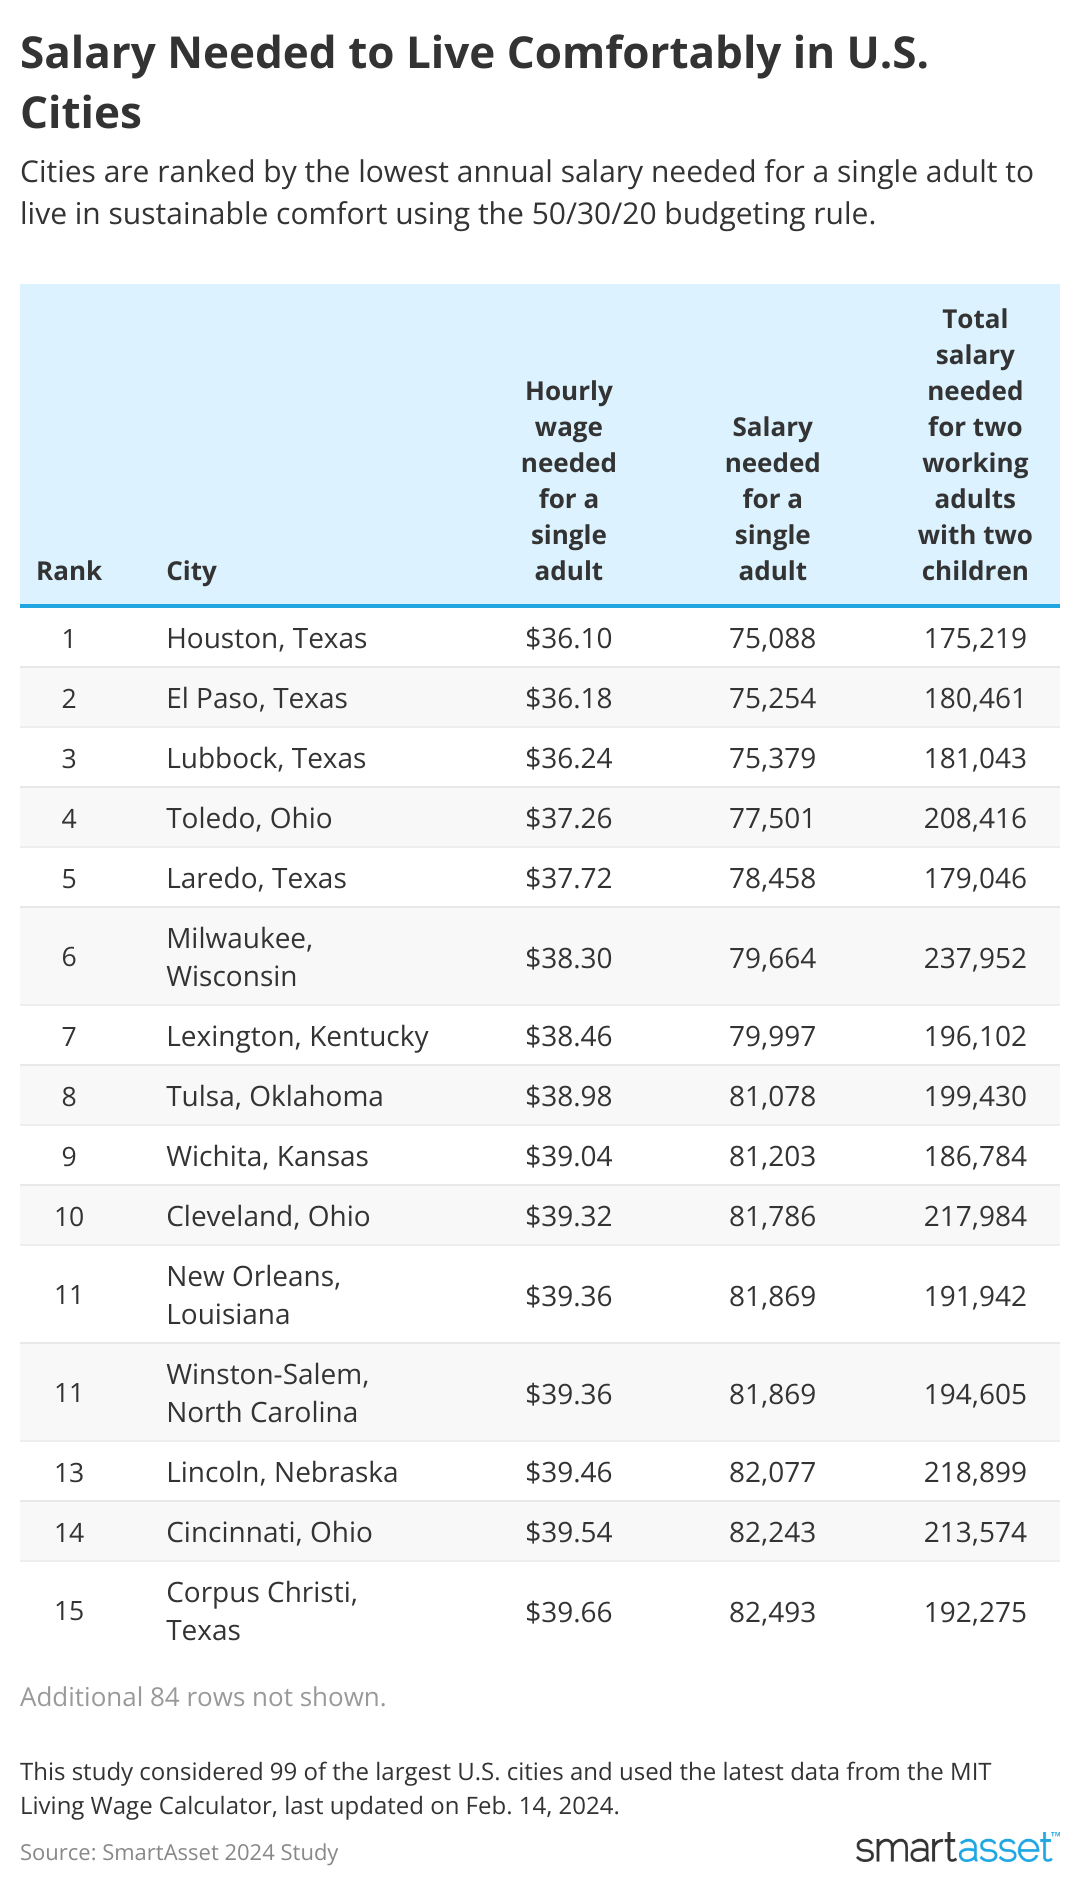 table showing salary needed to live comfortably in 15 U.S. cities